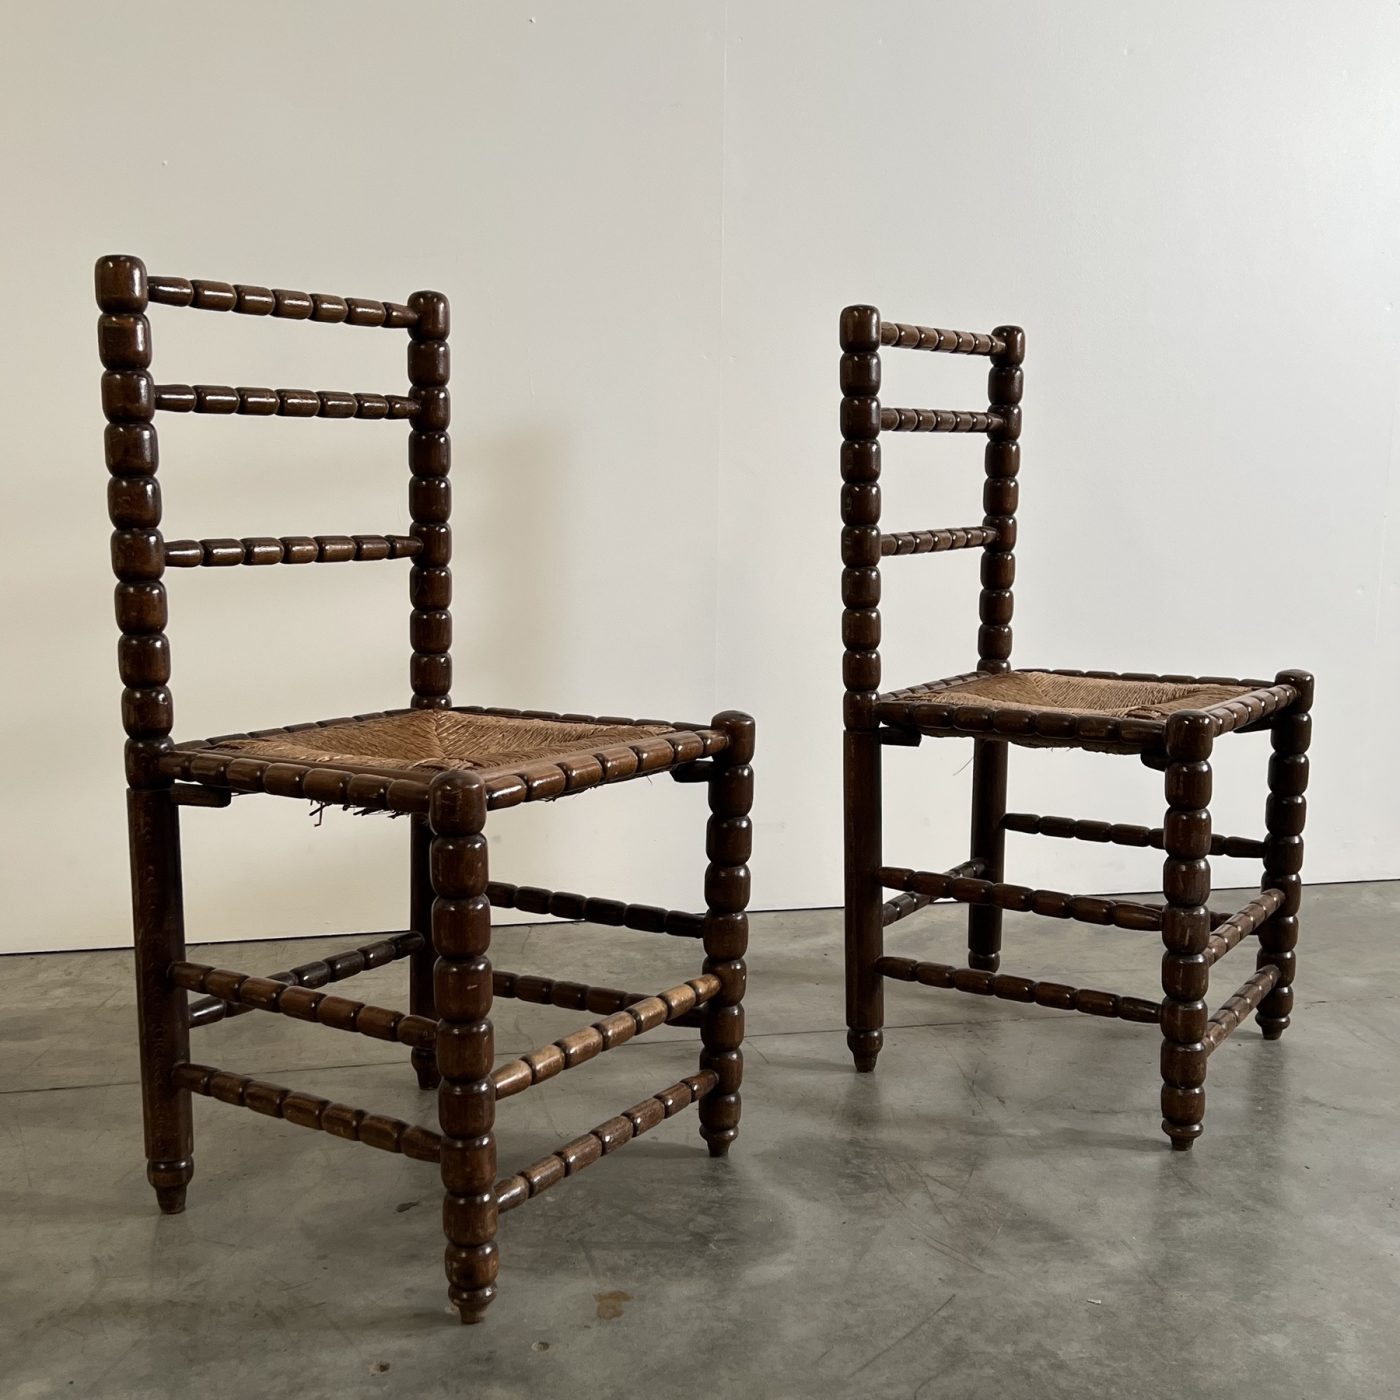 objet-wooden-chairs0001